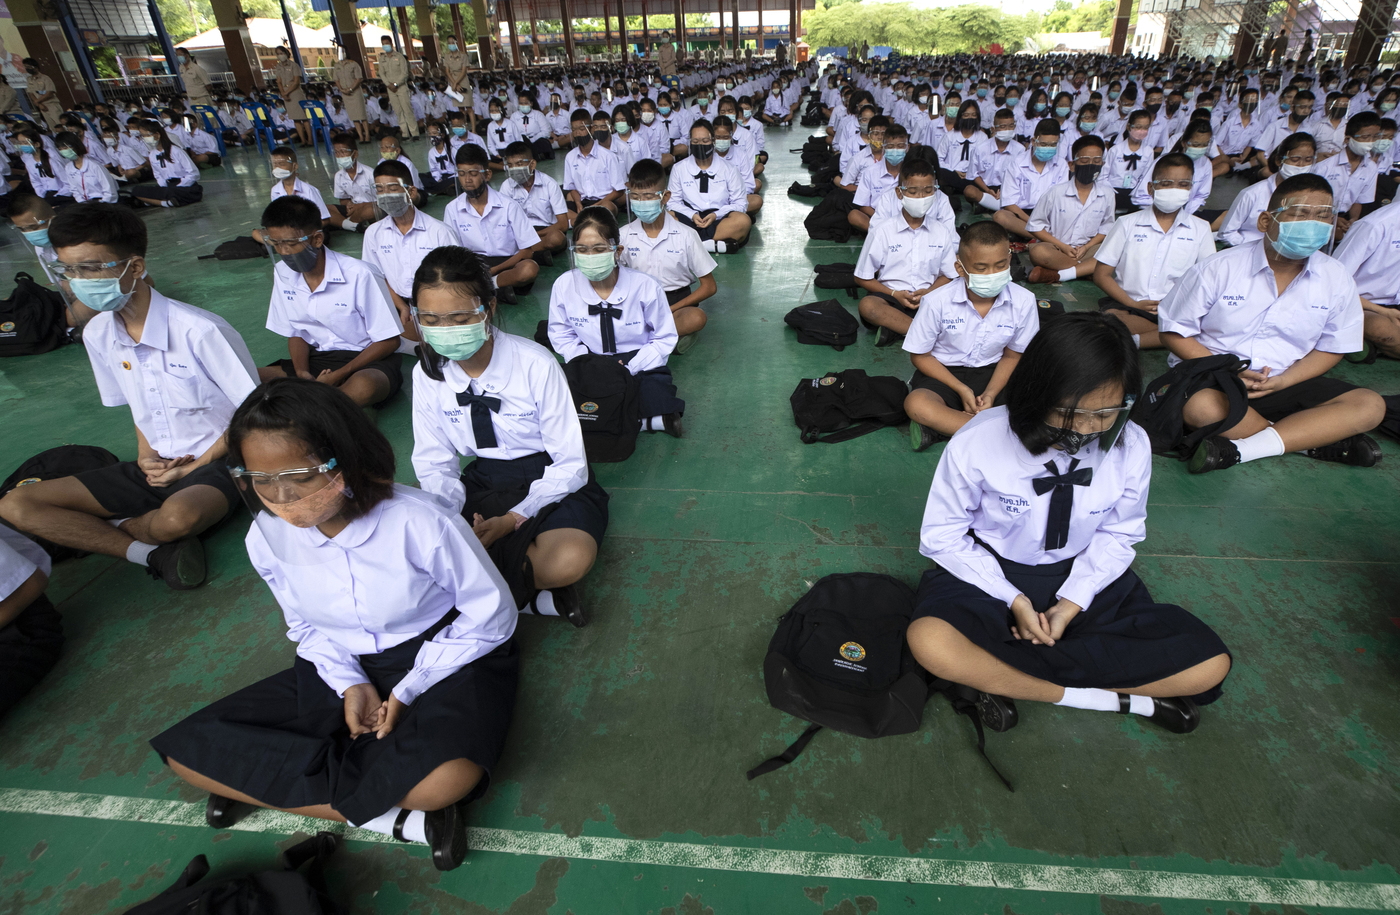 Students wearing a face mask to help curb the spread of the coronavirus as they meditate before class at Samkhok School in Pathum Thani, outside Bangkok, Wednesday, July 1, 2020. Thailand has begun a fifth phase of relaxations of COVID-19 restrictions, allowing the reopening of schools and high-risk entertainment venues such as pubs and massage parlors that had been shut since mid-March. (AP Photo/Sakchai Lalit)